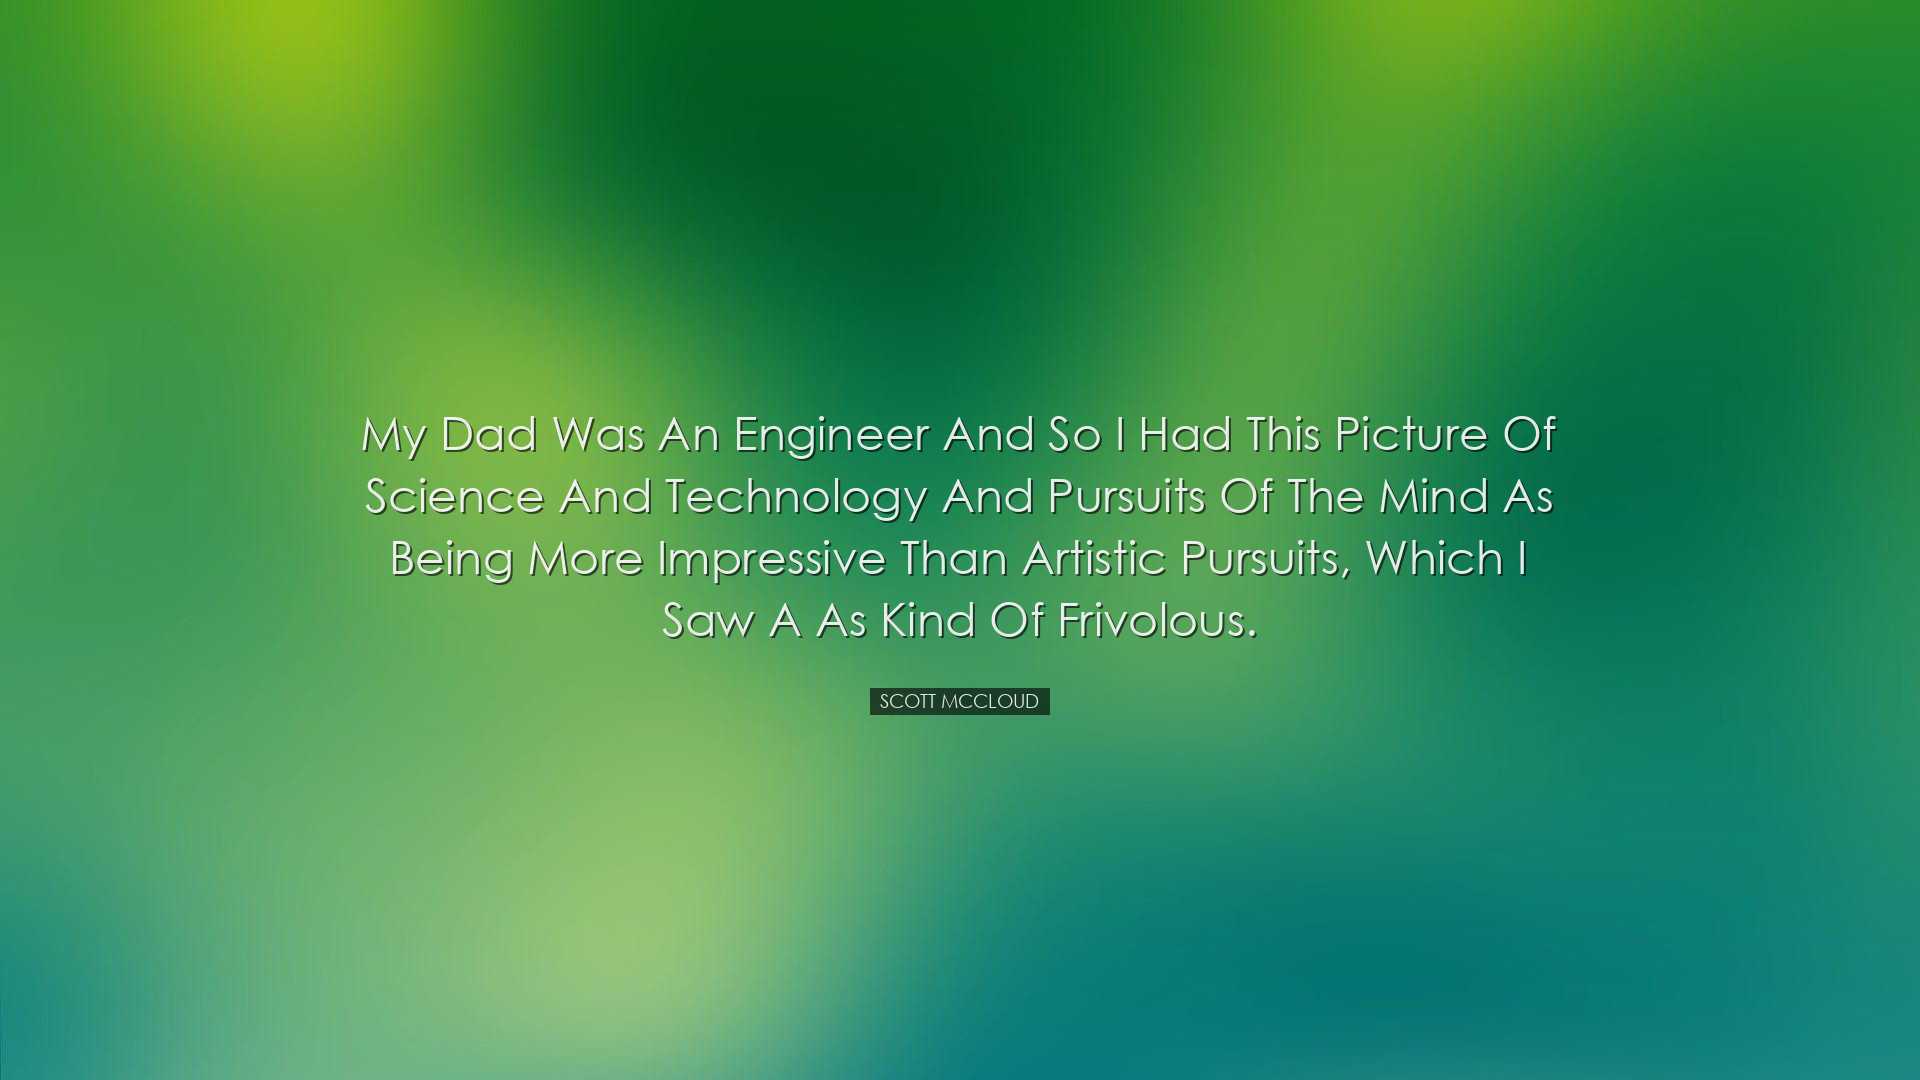 My dad was an engineer and so I had this picture of science and te